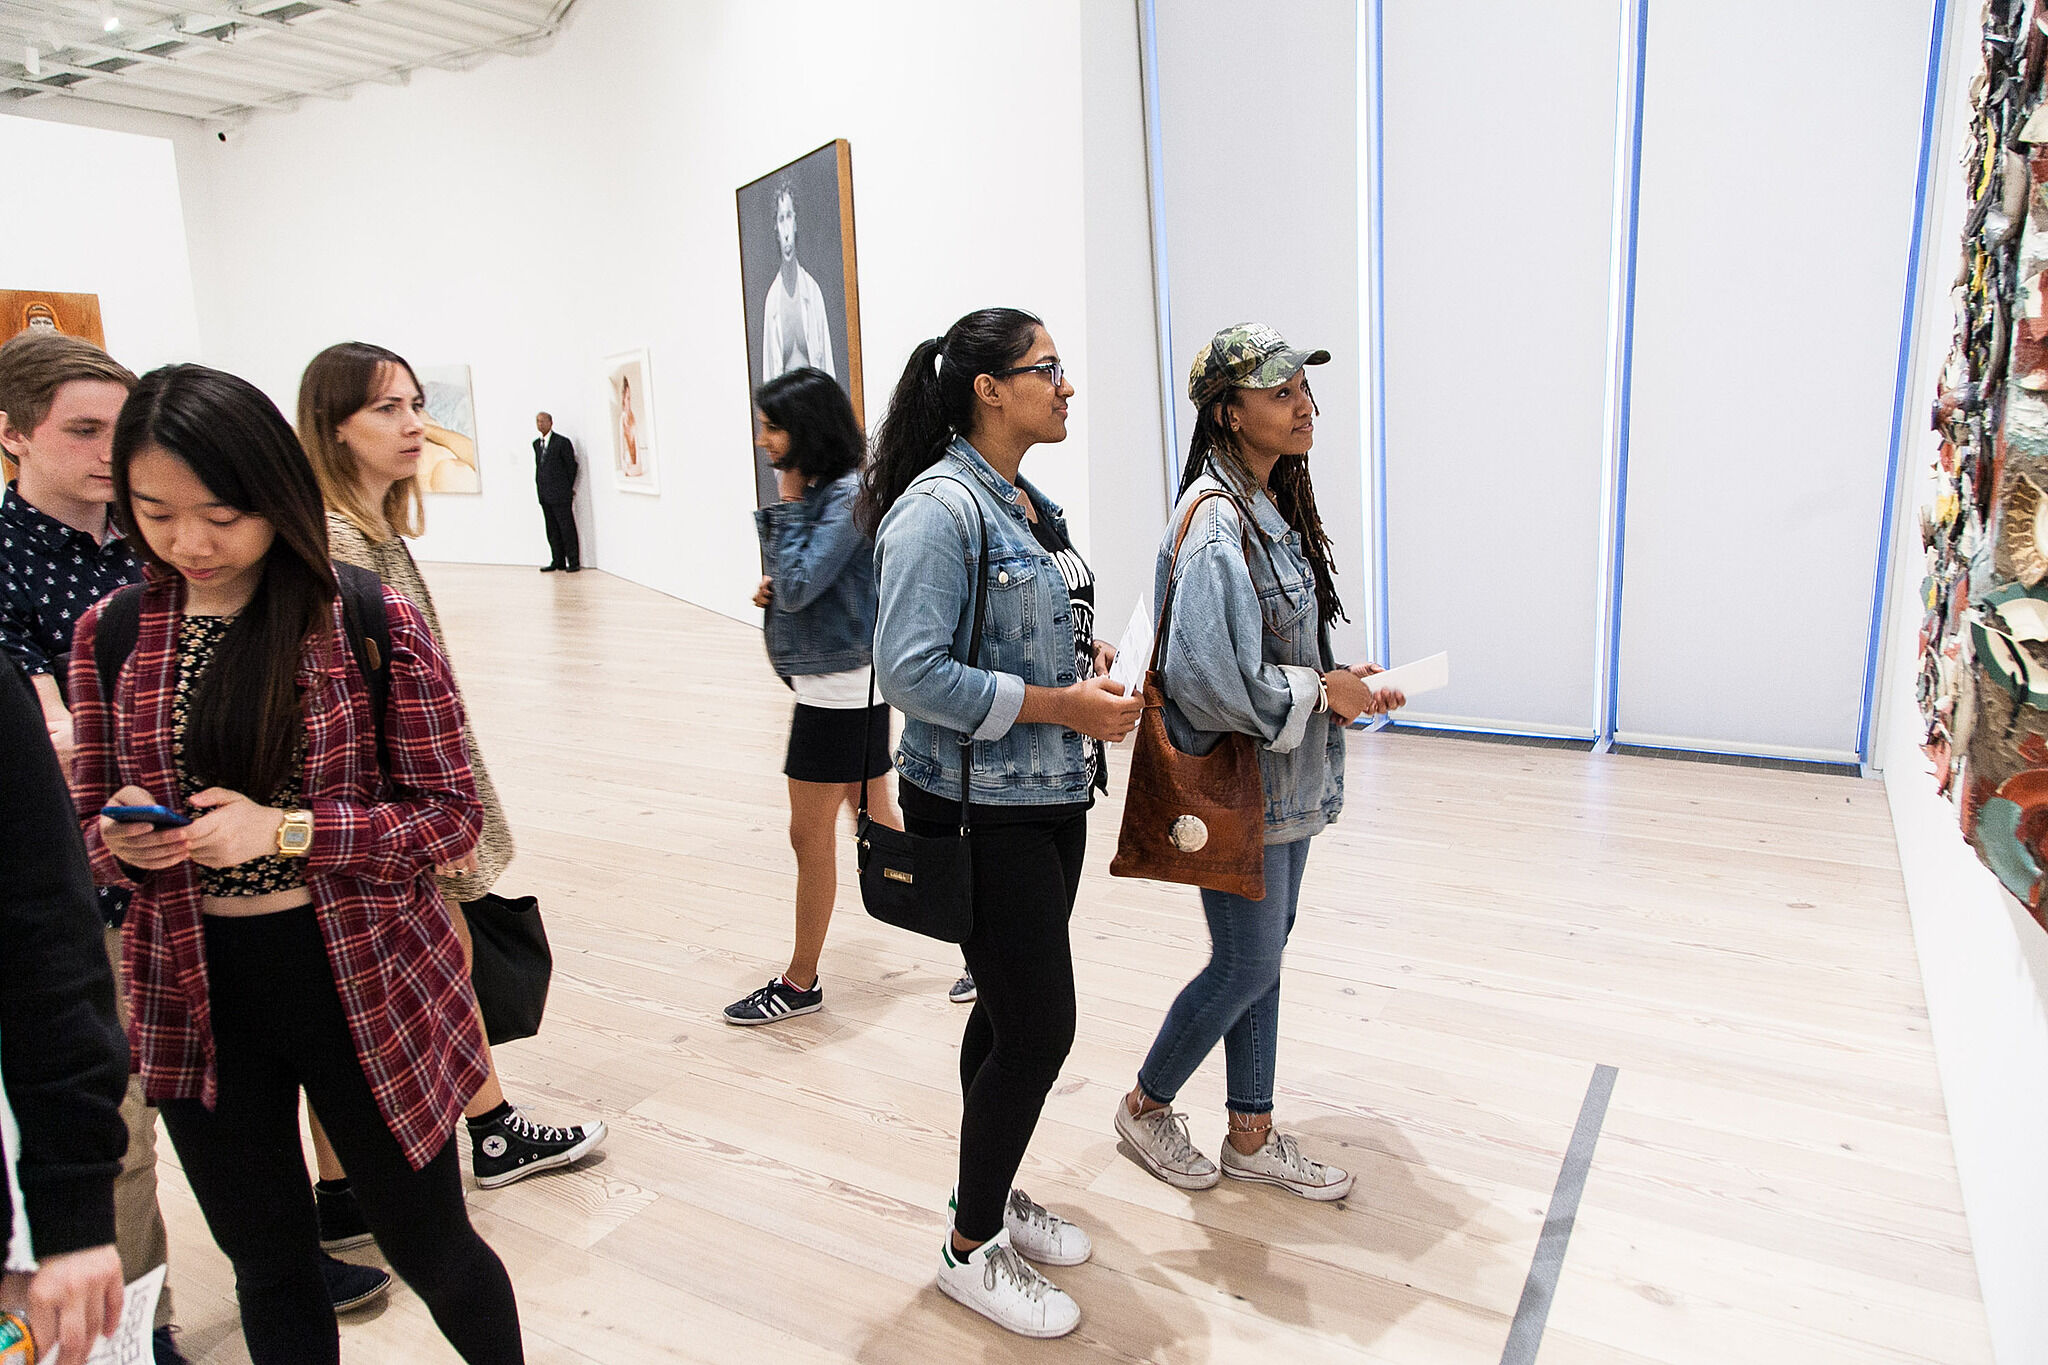 Students use their smartphones in the gallery